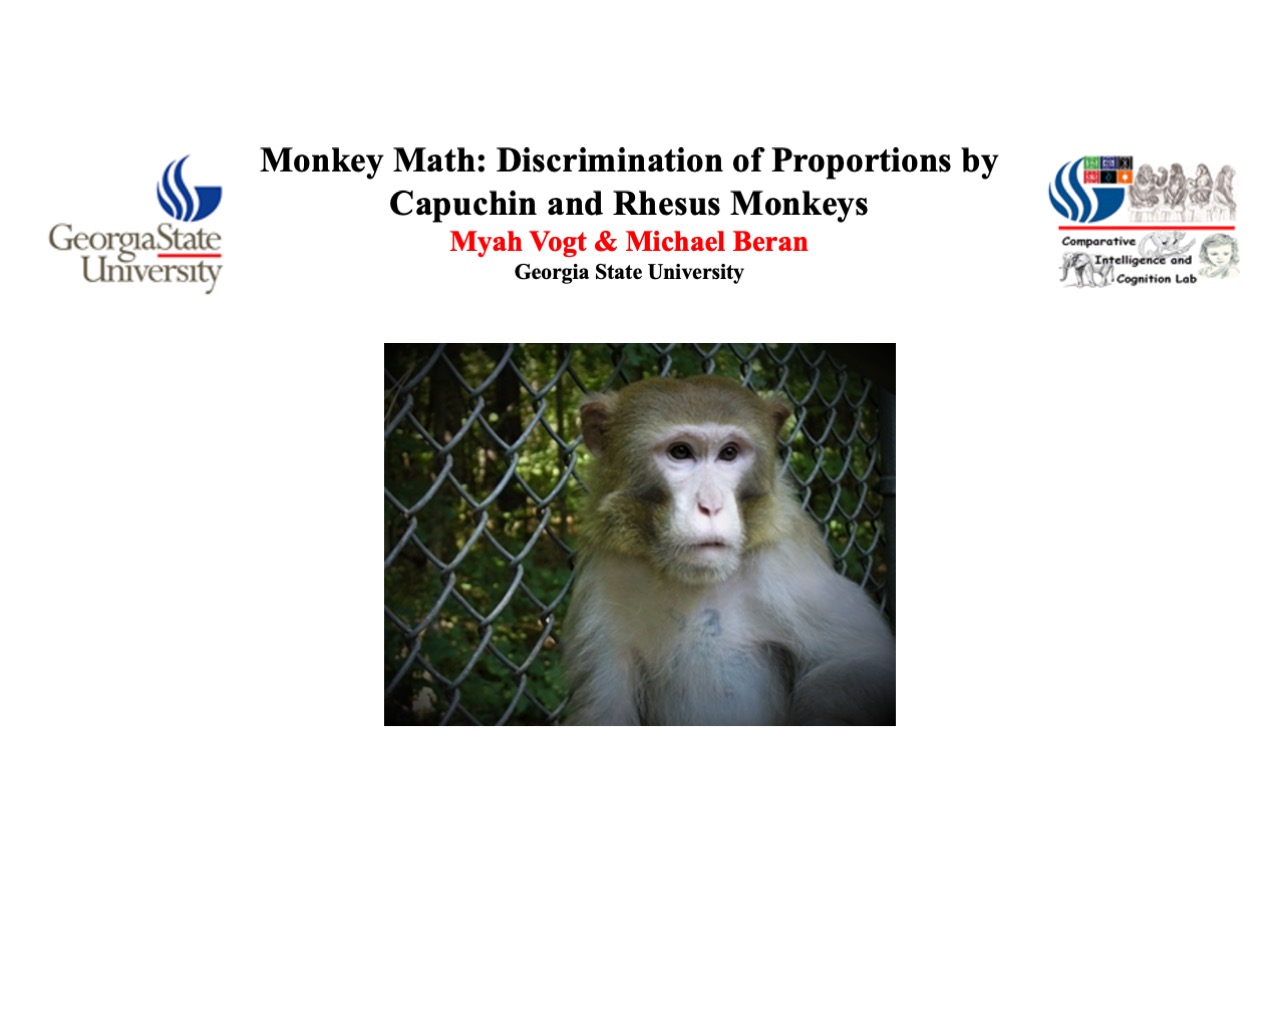 Showcase Image for Monkey Math: Discrimination of Proportions by Capuchin and Rhesus Monkeys